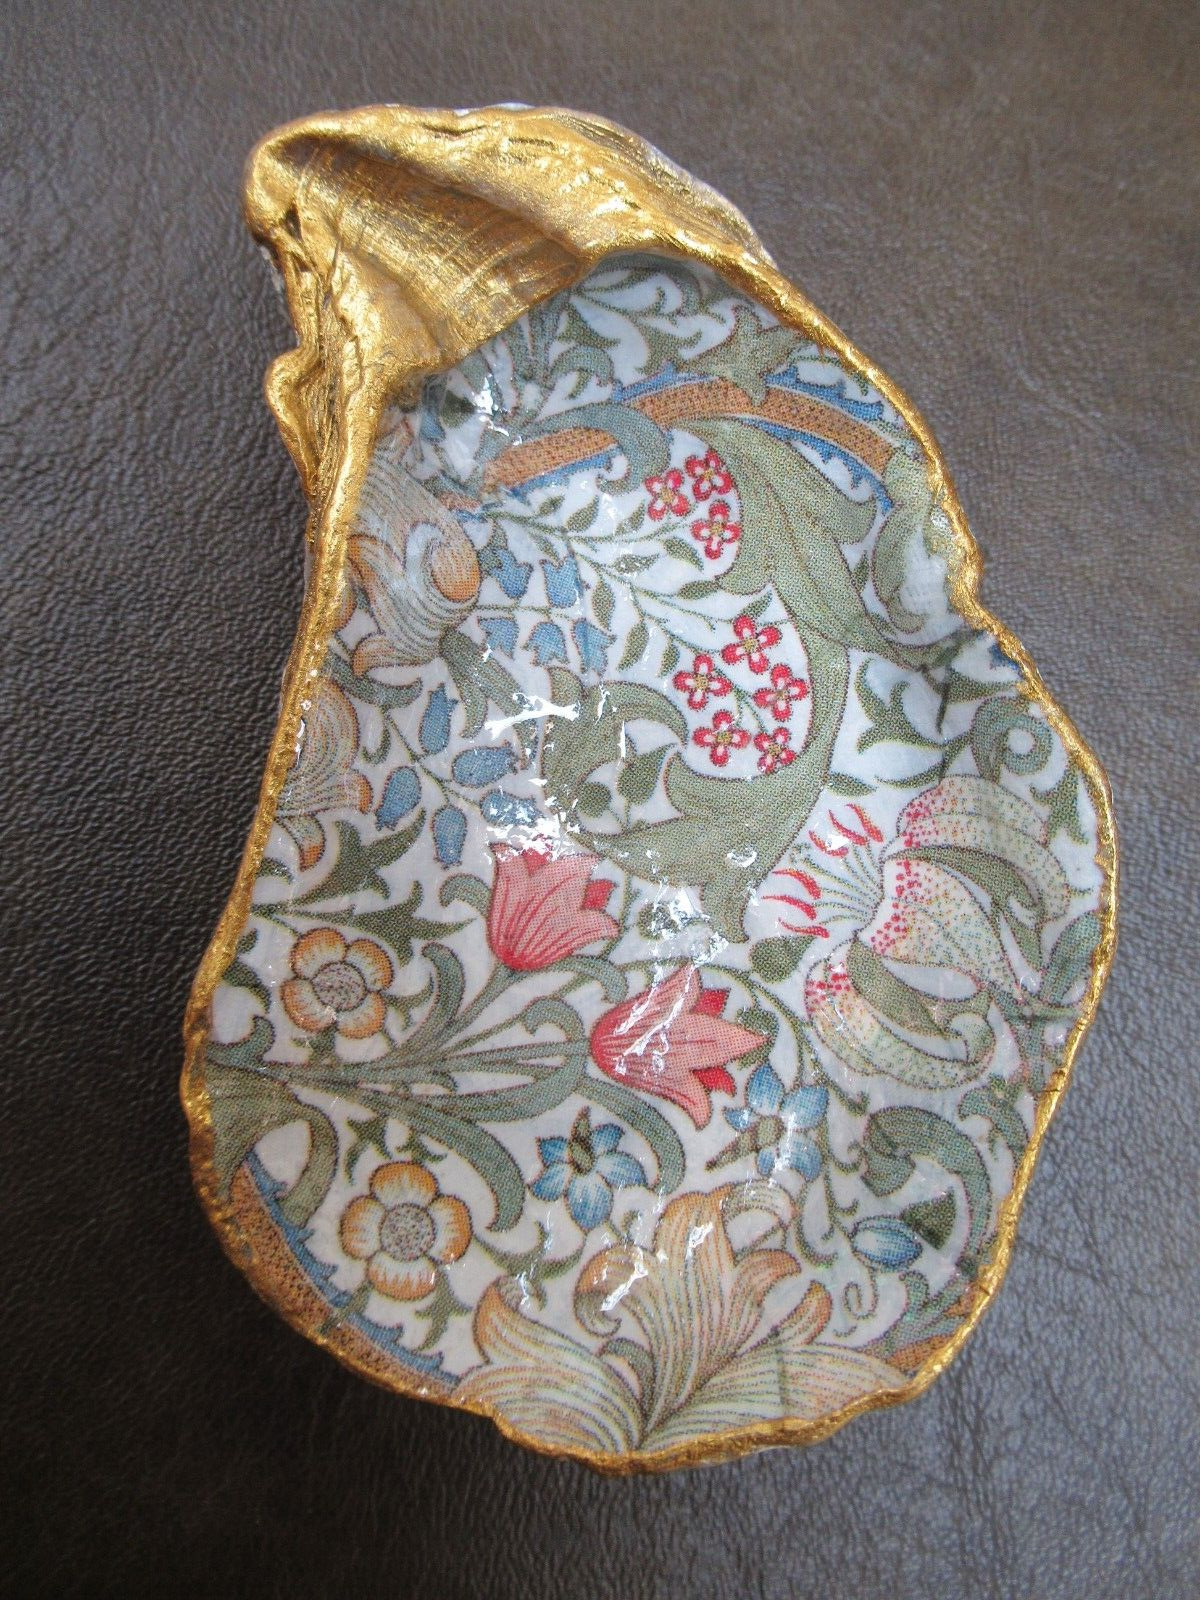  Oyster Shell Decoupaged with Golden Lilly    Trinket Holder or Natural Decor